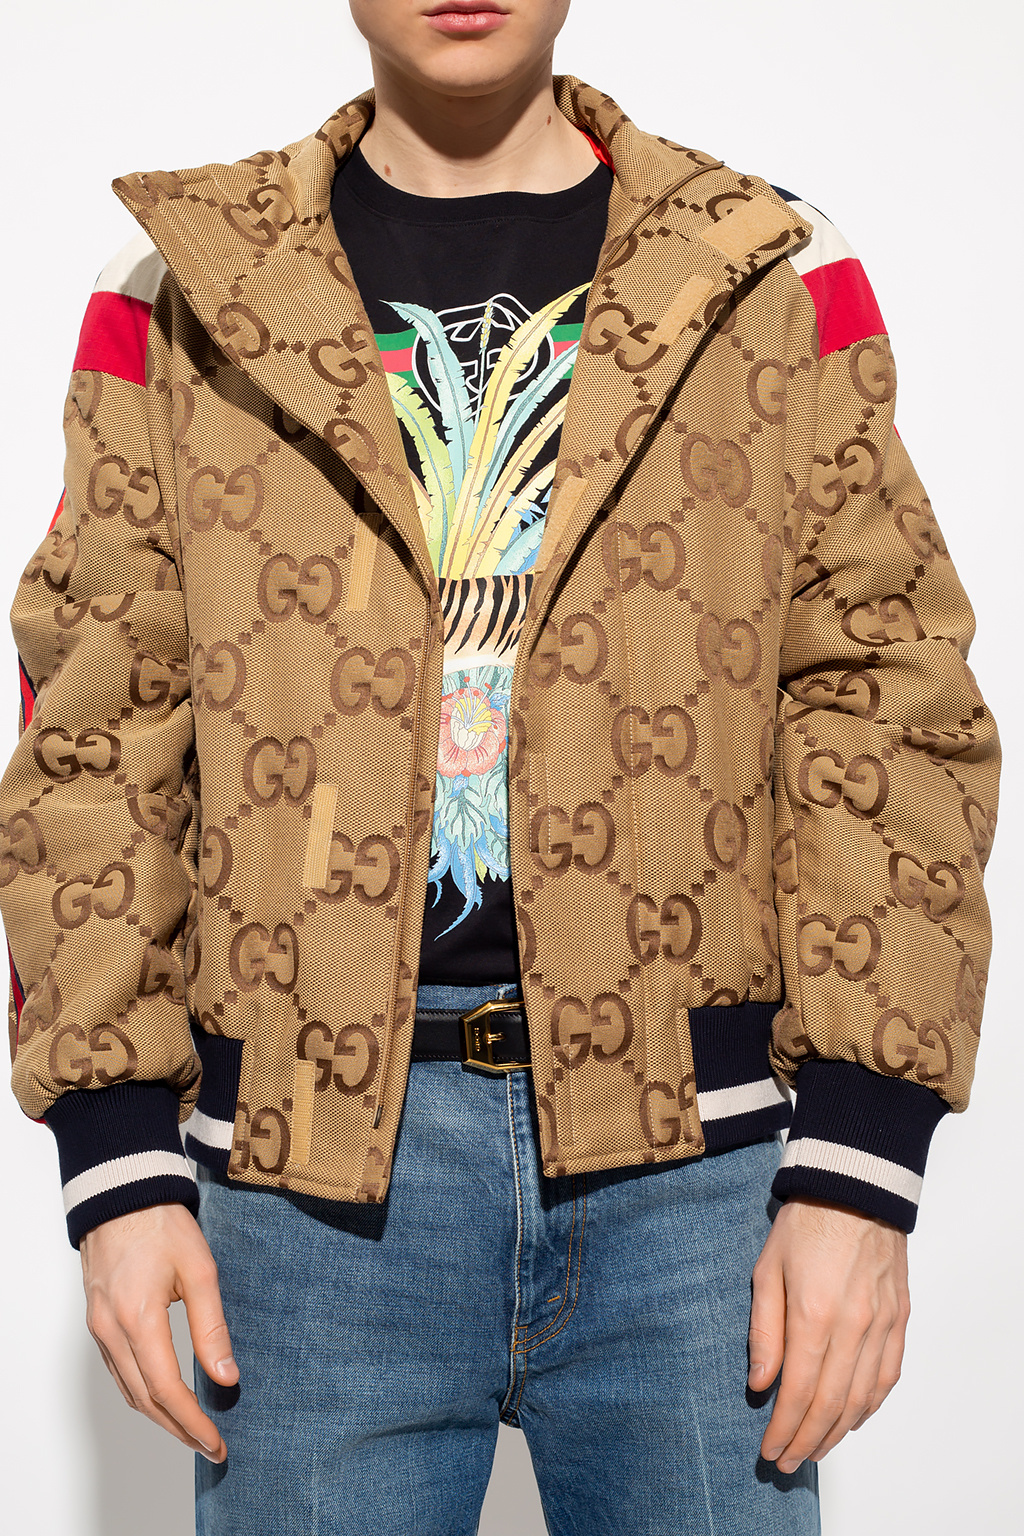 Gucci Bomber jacket from the ‘Gucci Tiger’ collection